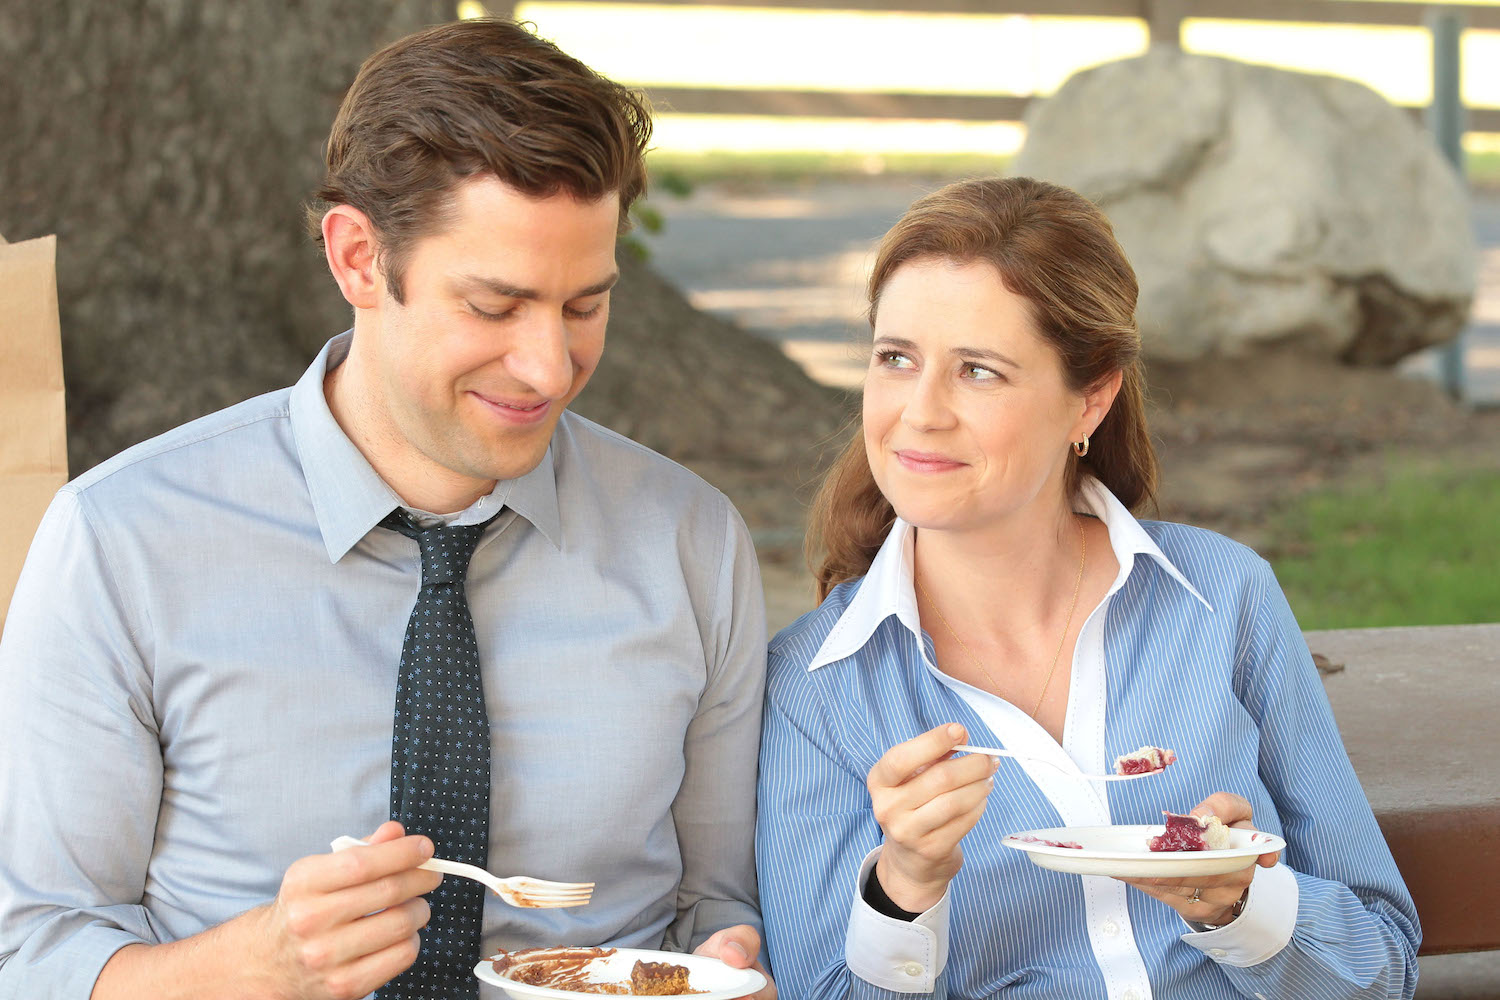 ‘The Office’ Kept a Huge Jim and Pam Surprise Moment Secret From NBC so the Network Wouldn’t Spoil It for Fans